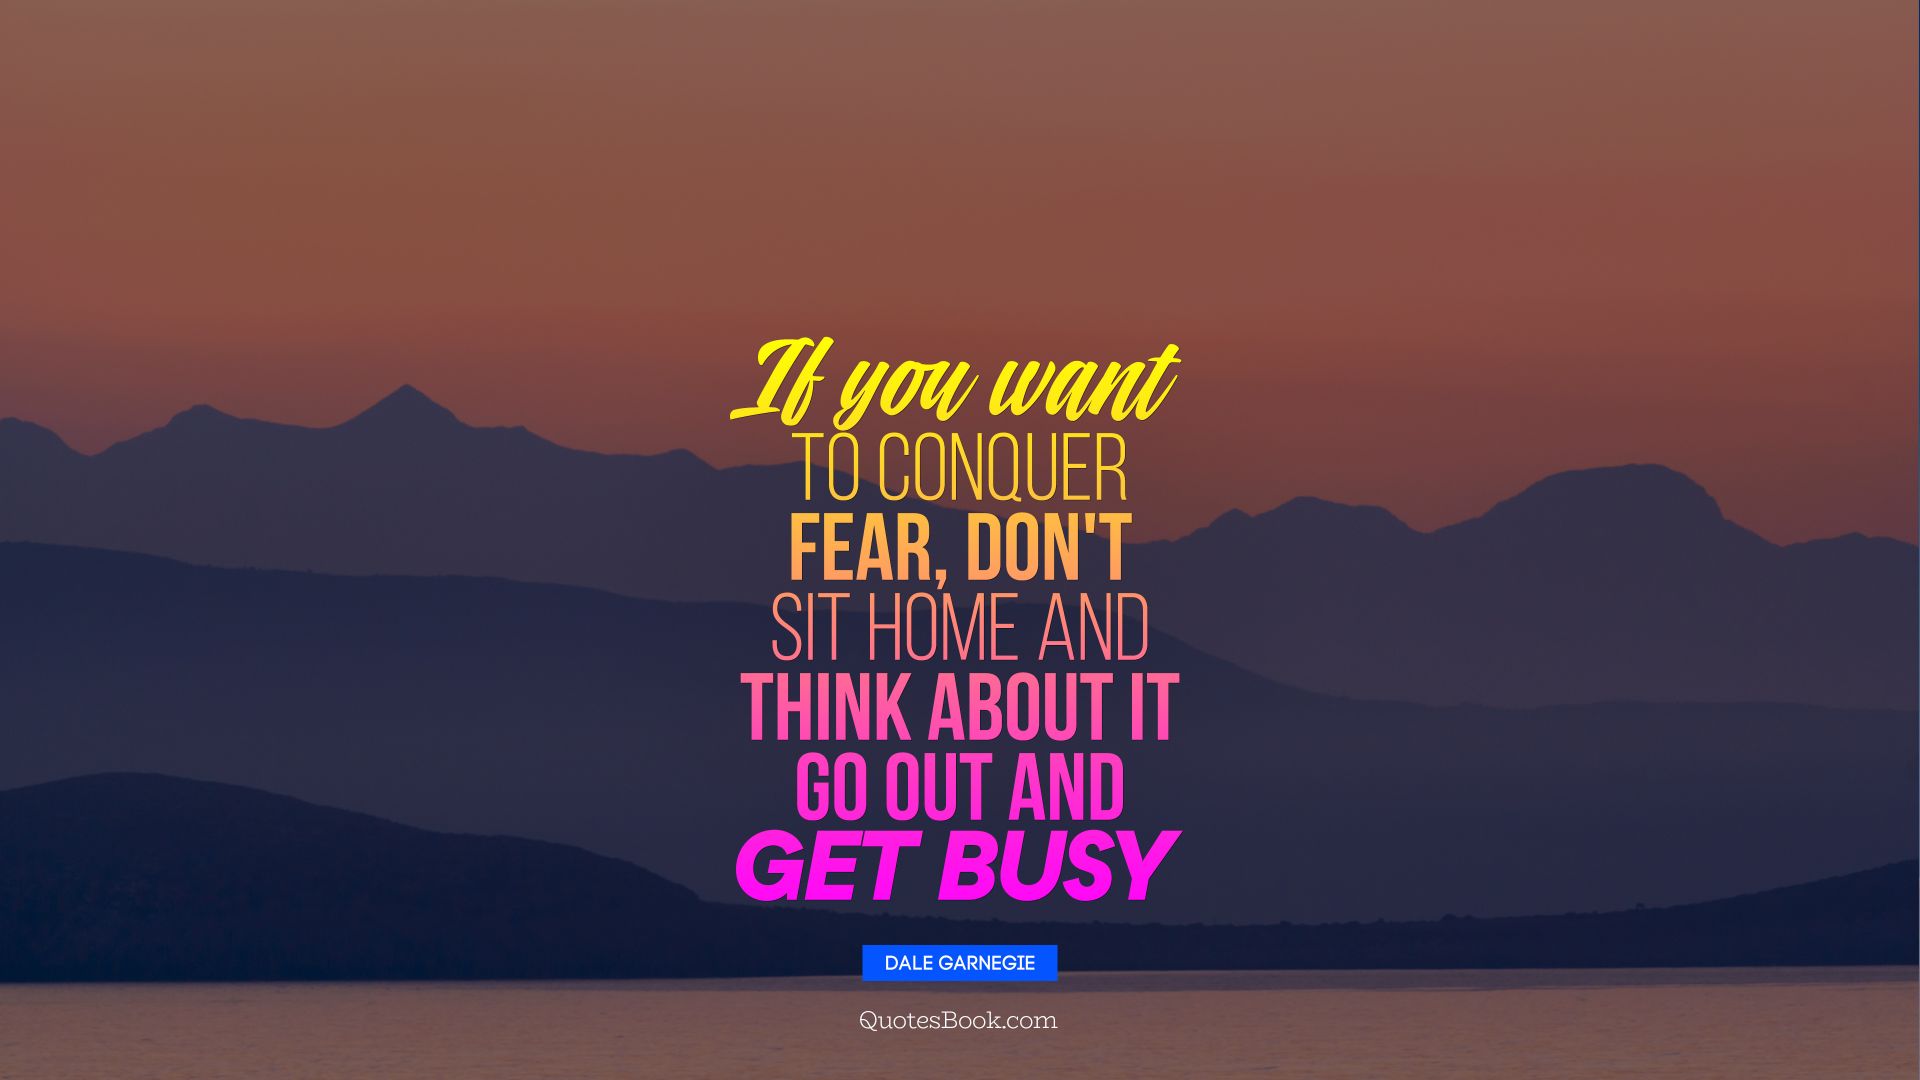 If you want to conquer fear, don't sit home and think about it Go out and get busy. - Quote by Dale Garnegie